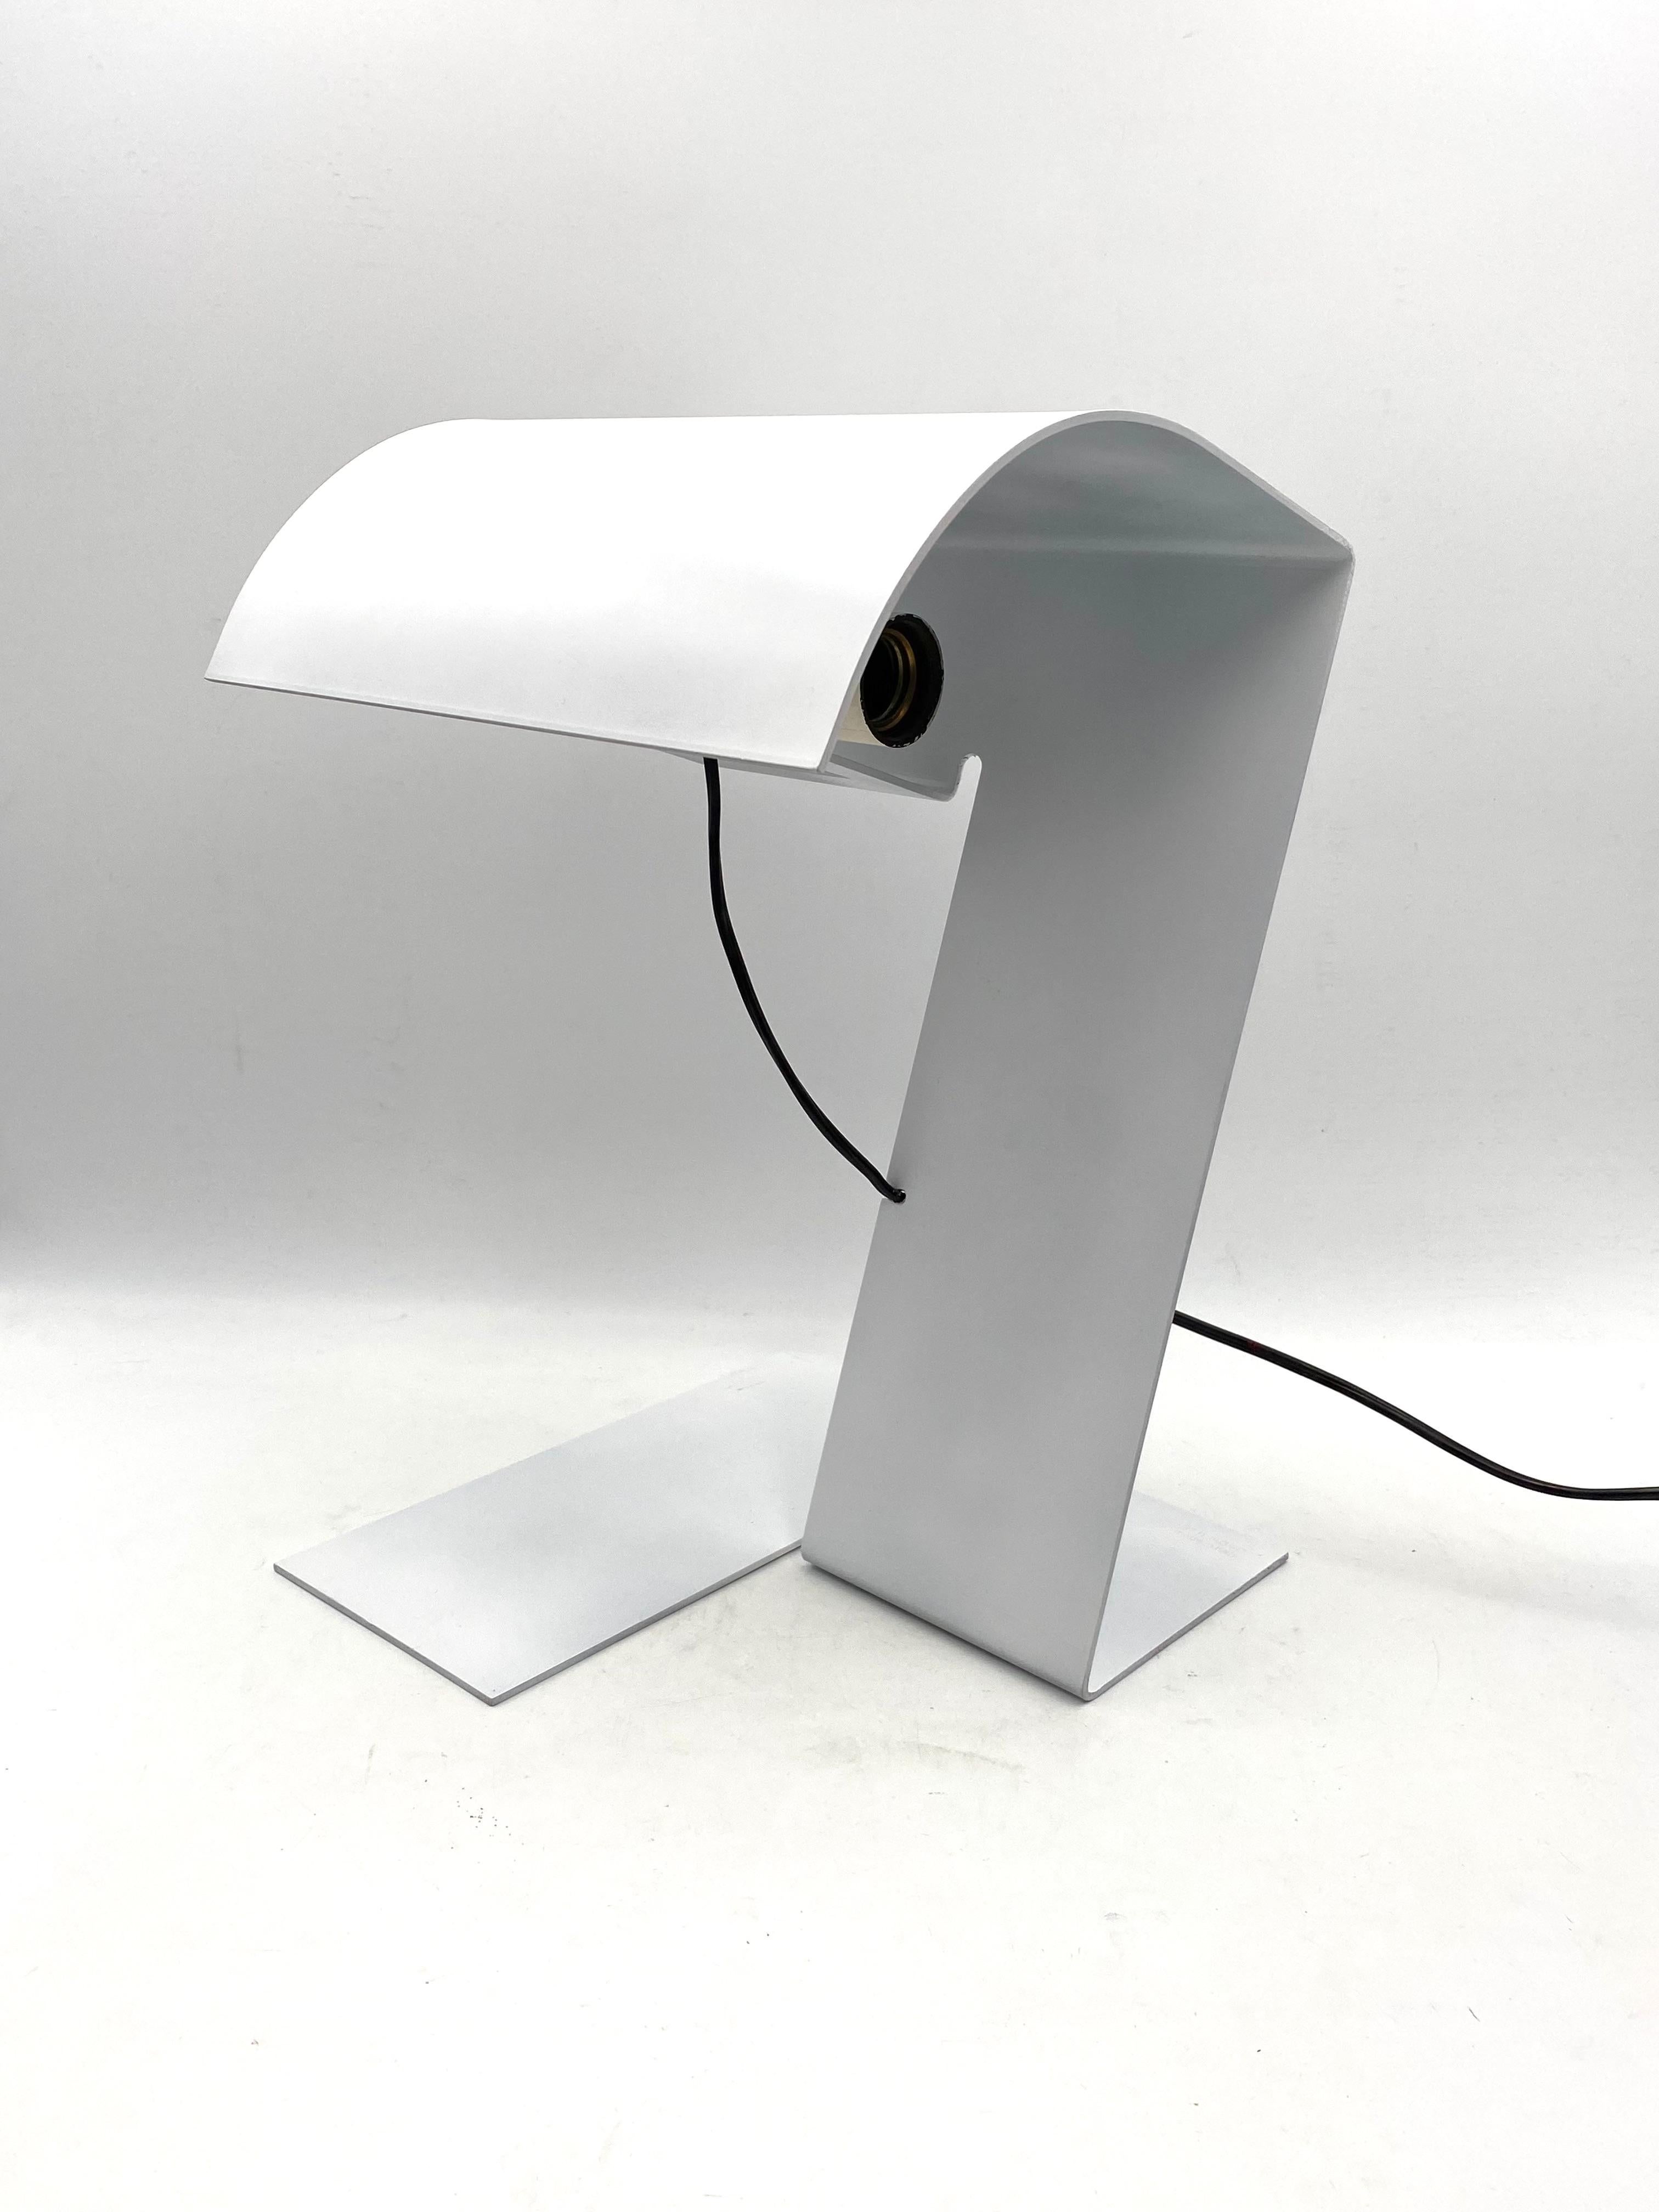 White 'Blitz' table lamp designed by collective Trabucchi, Vecchi and Volpi

Stilnovo, Italy 1972 

Lacquered sheet metal

Measures : 37 cm H x 30 x 30 cm

Conditions: Very good, consistent with age and use. European plug. In working